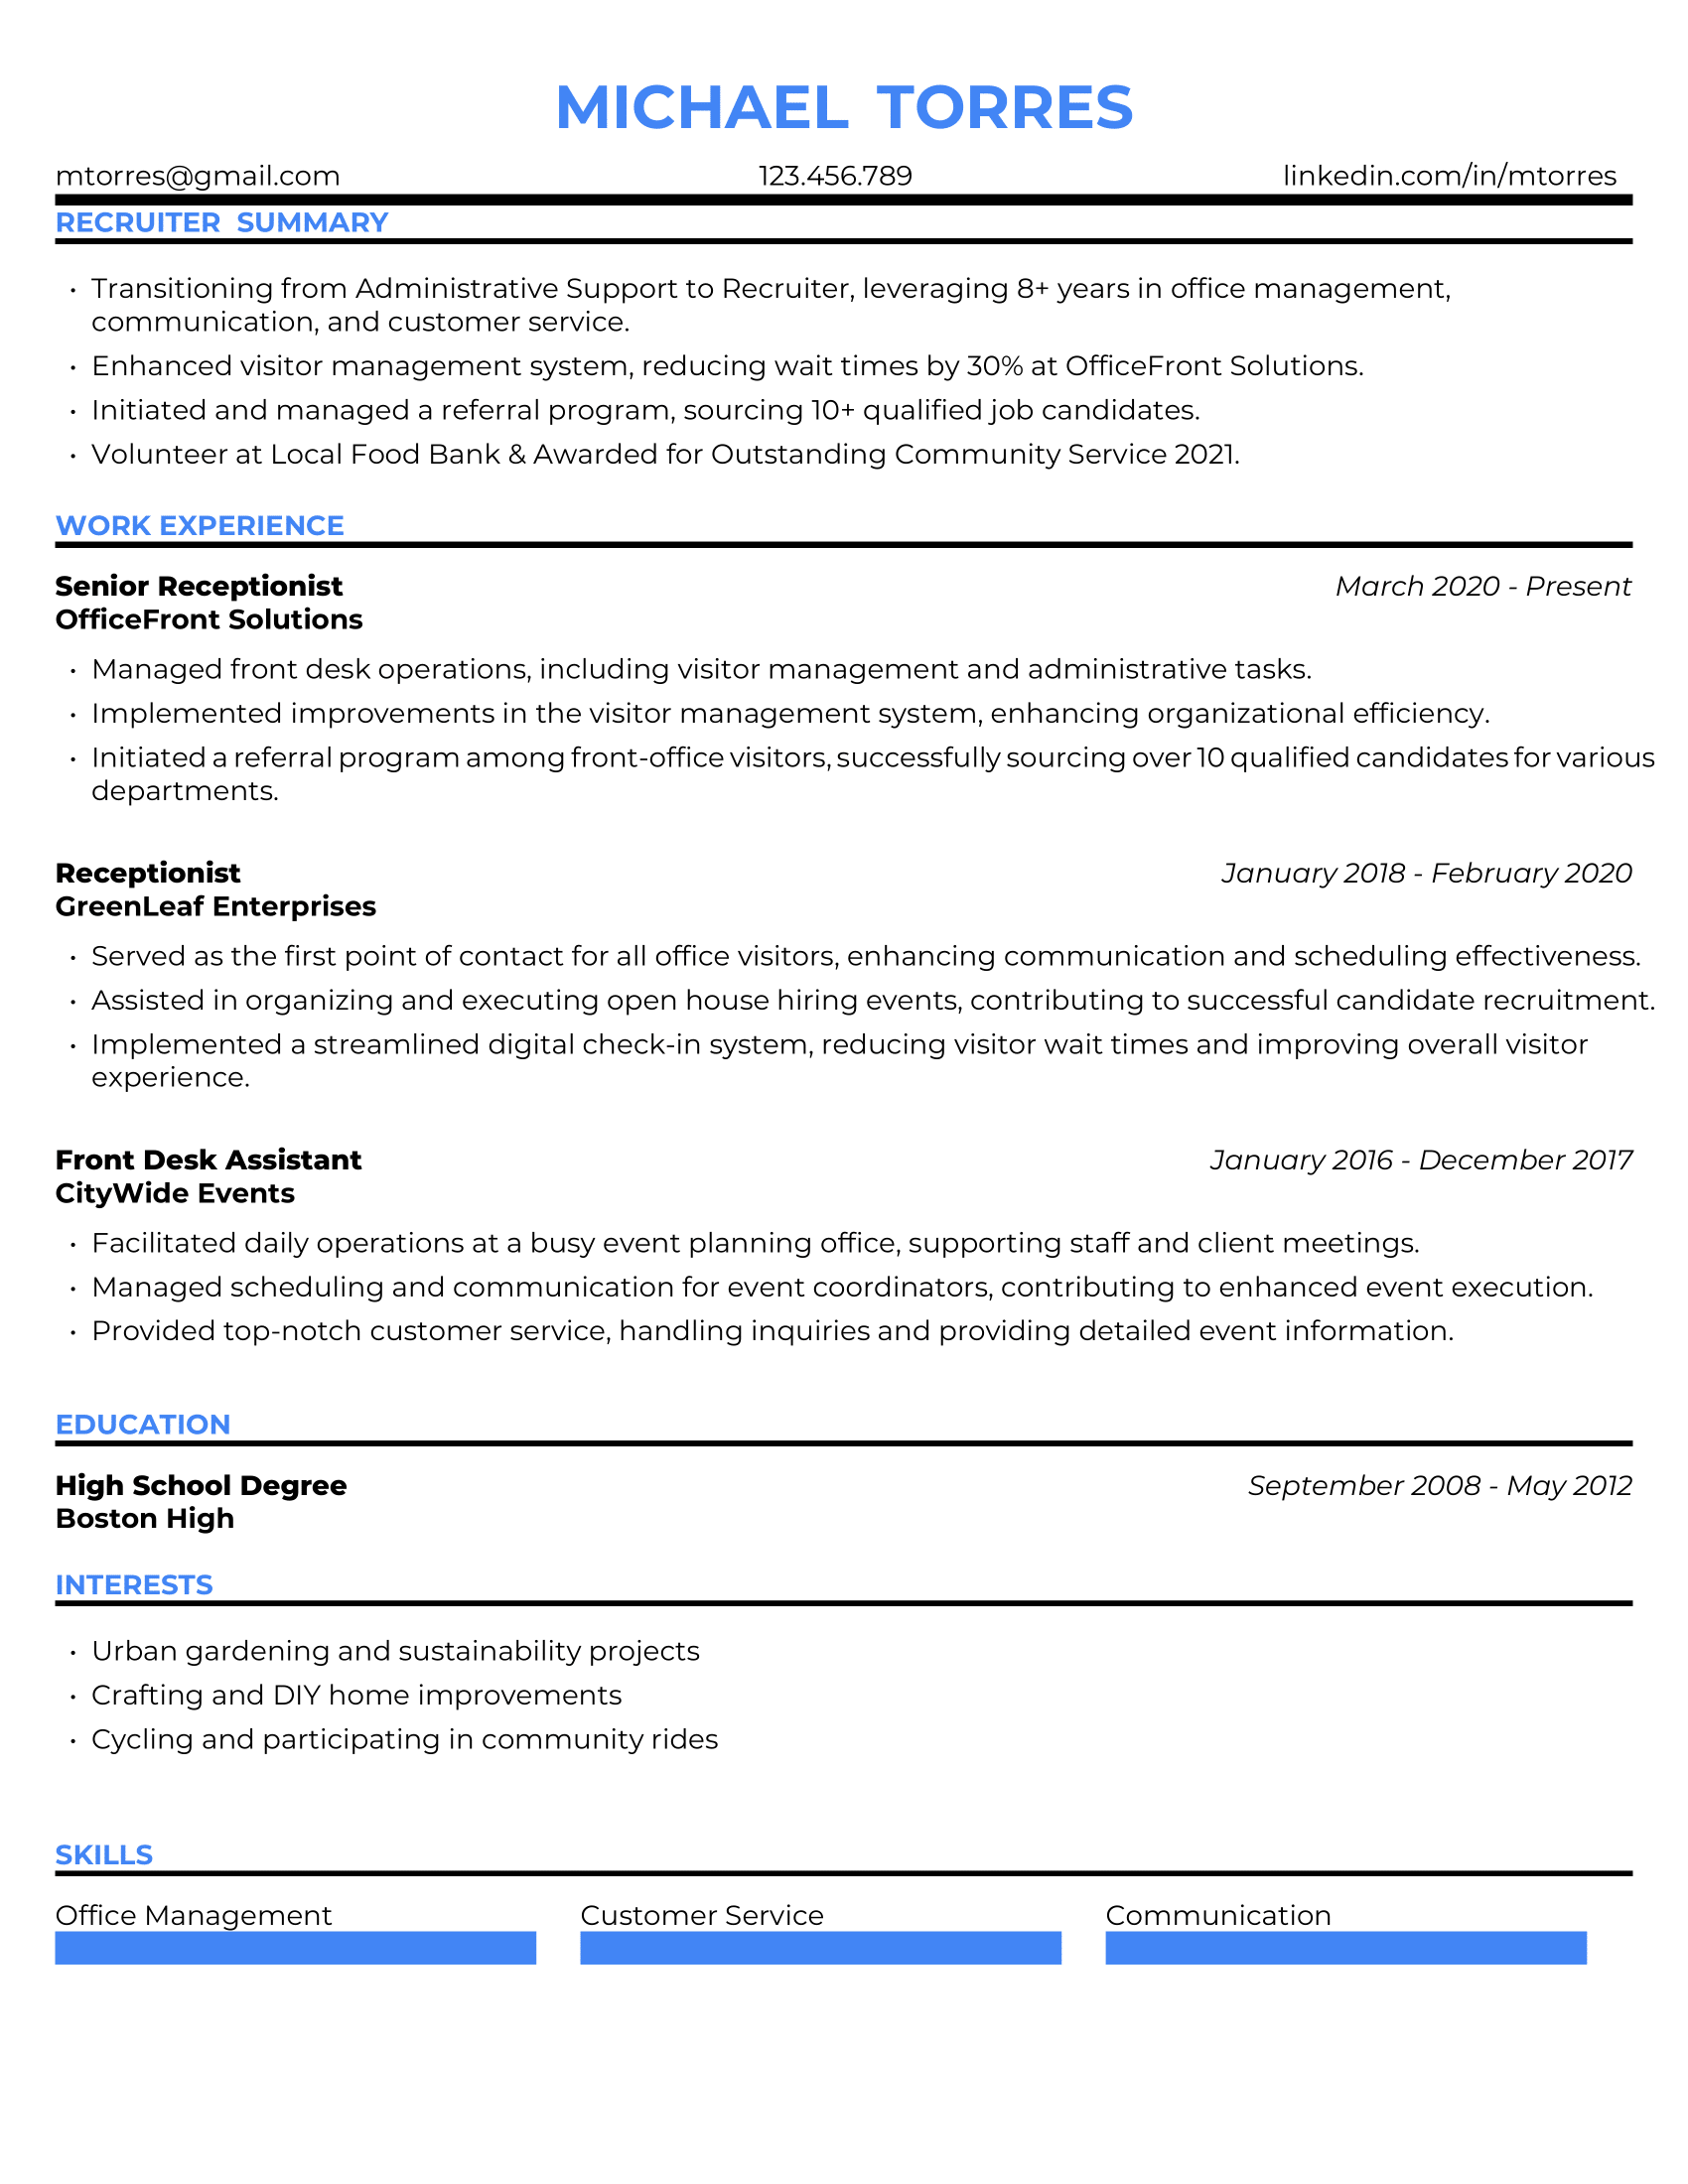 Recruiter Resume Example #2 - Non-Traditional Background